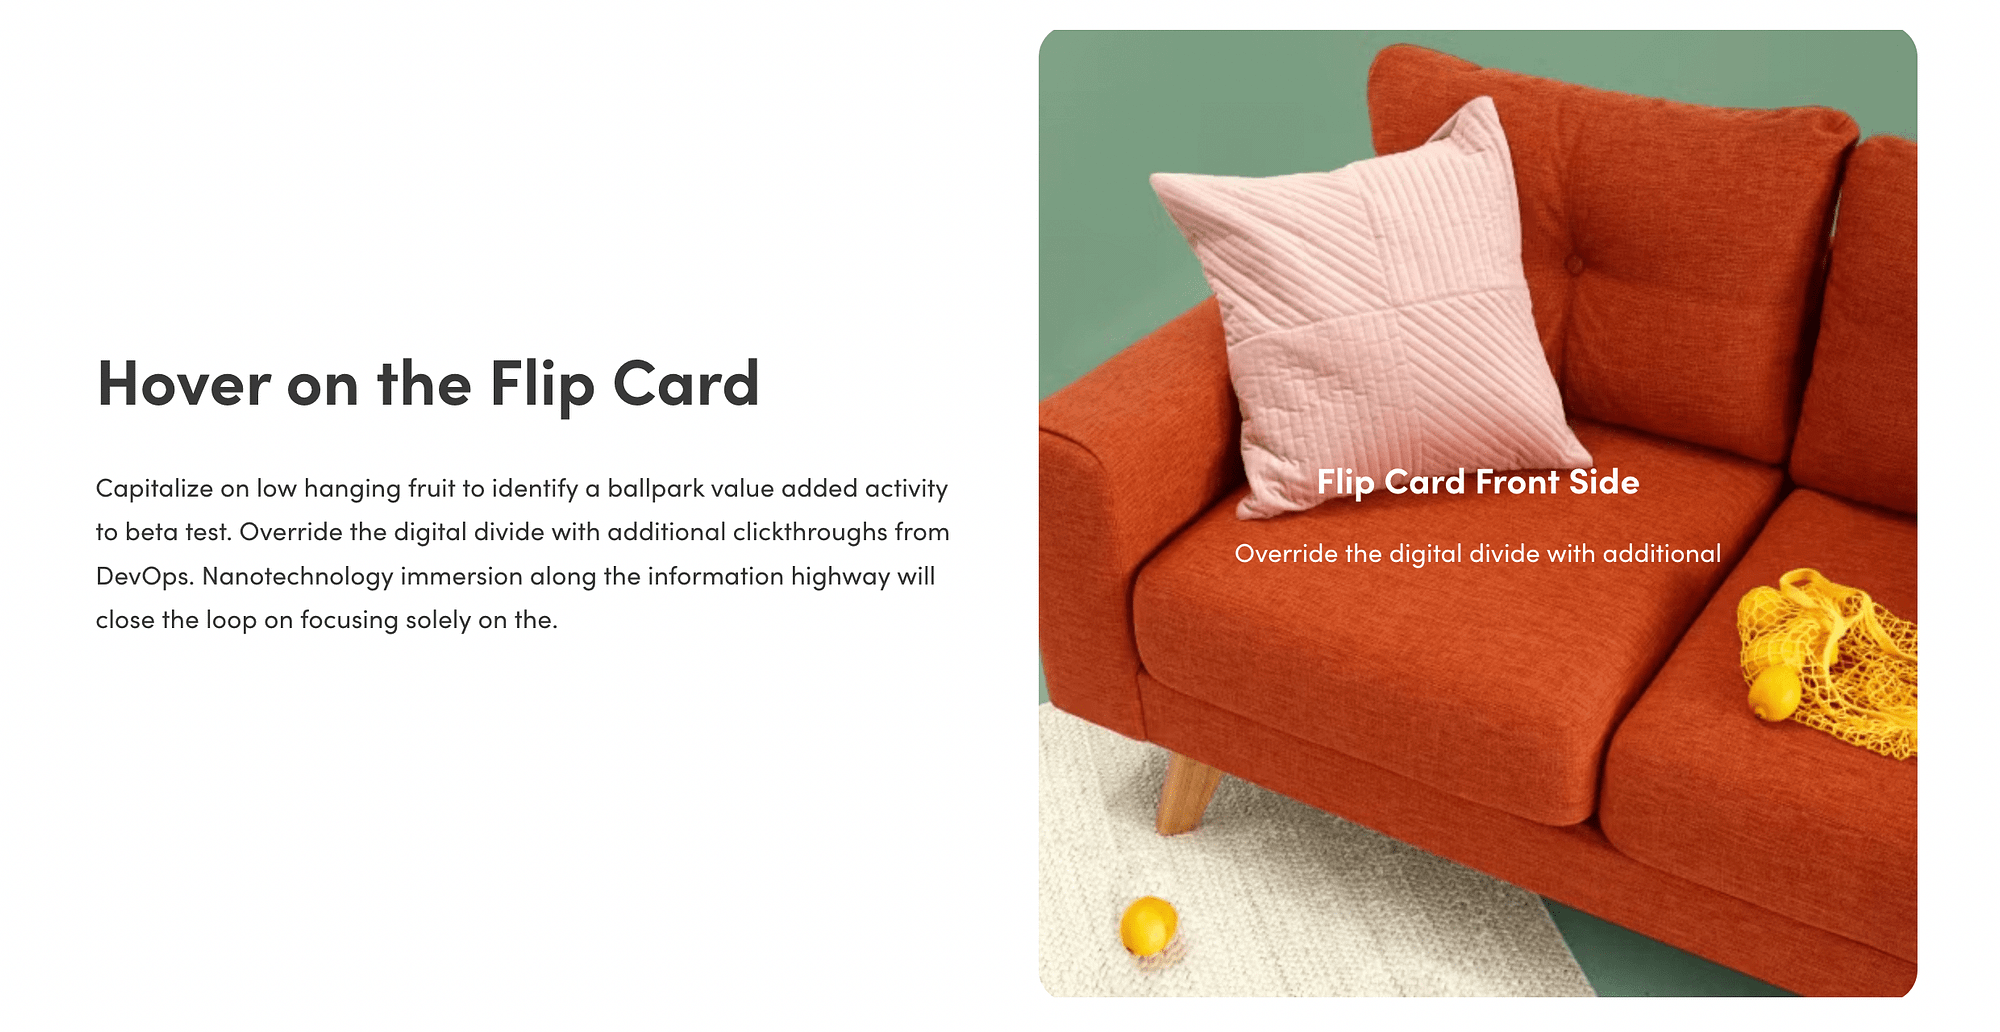 The front of a flip card.